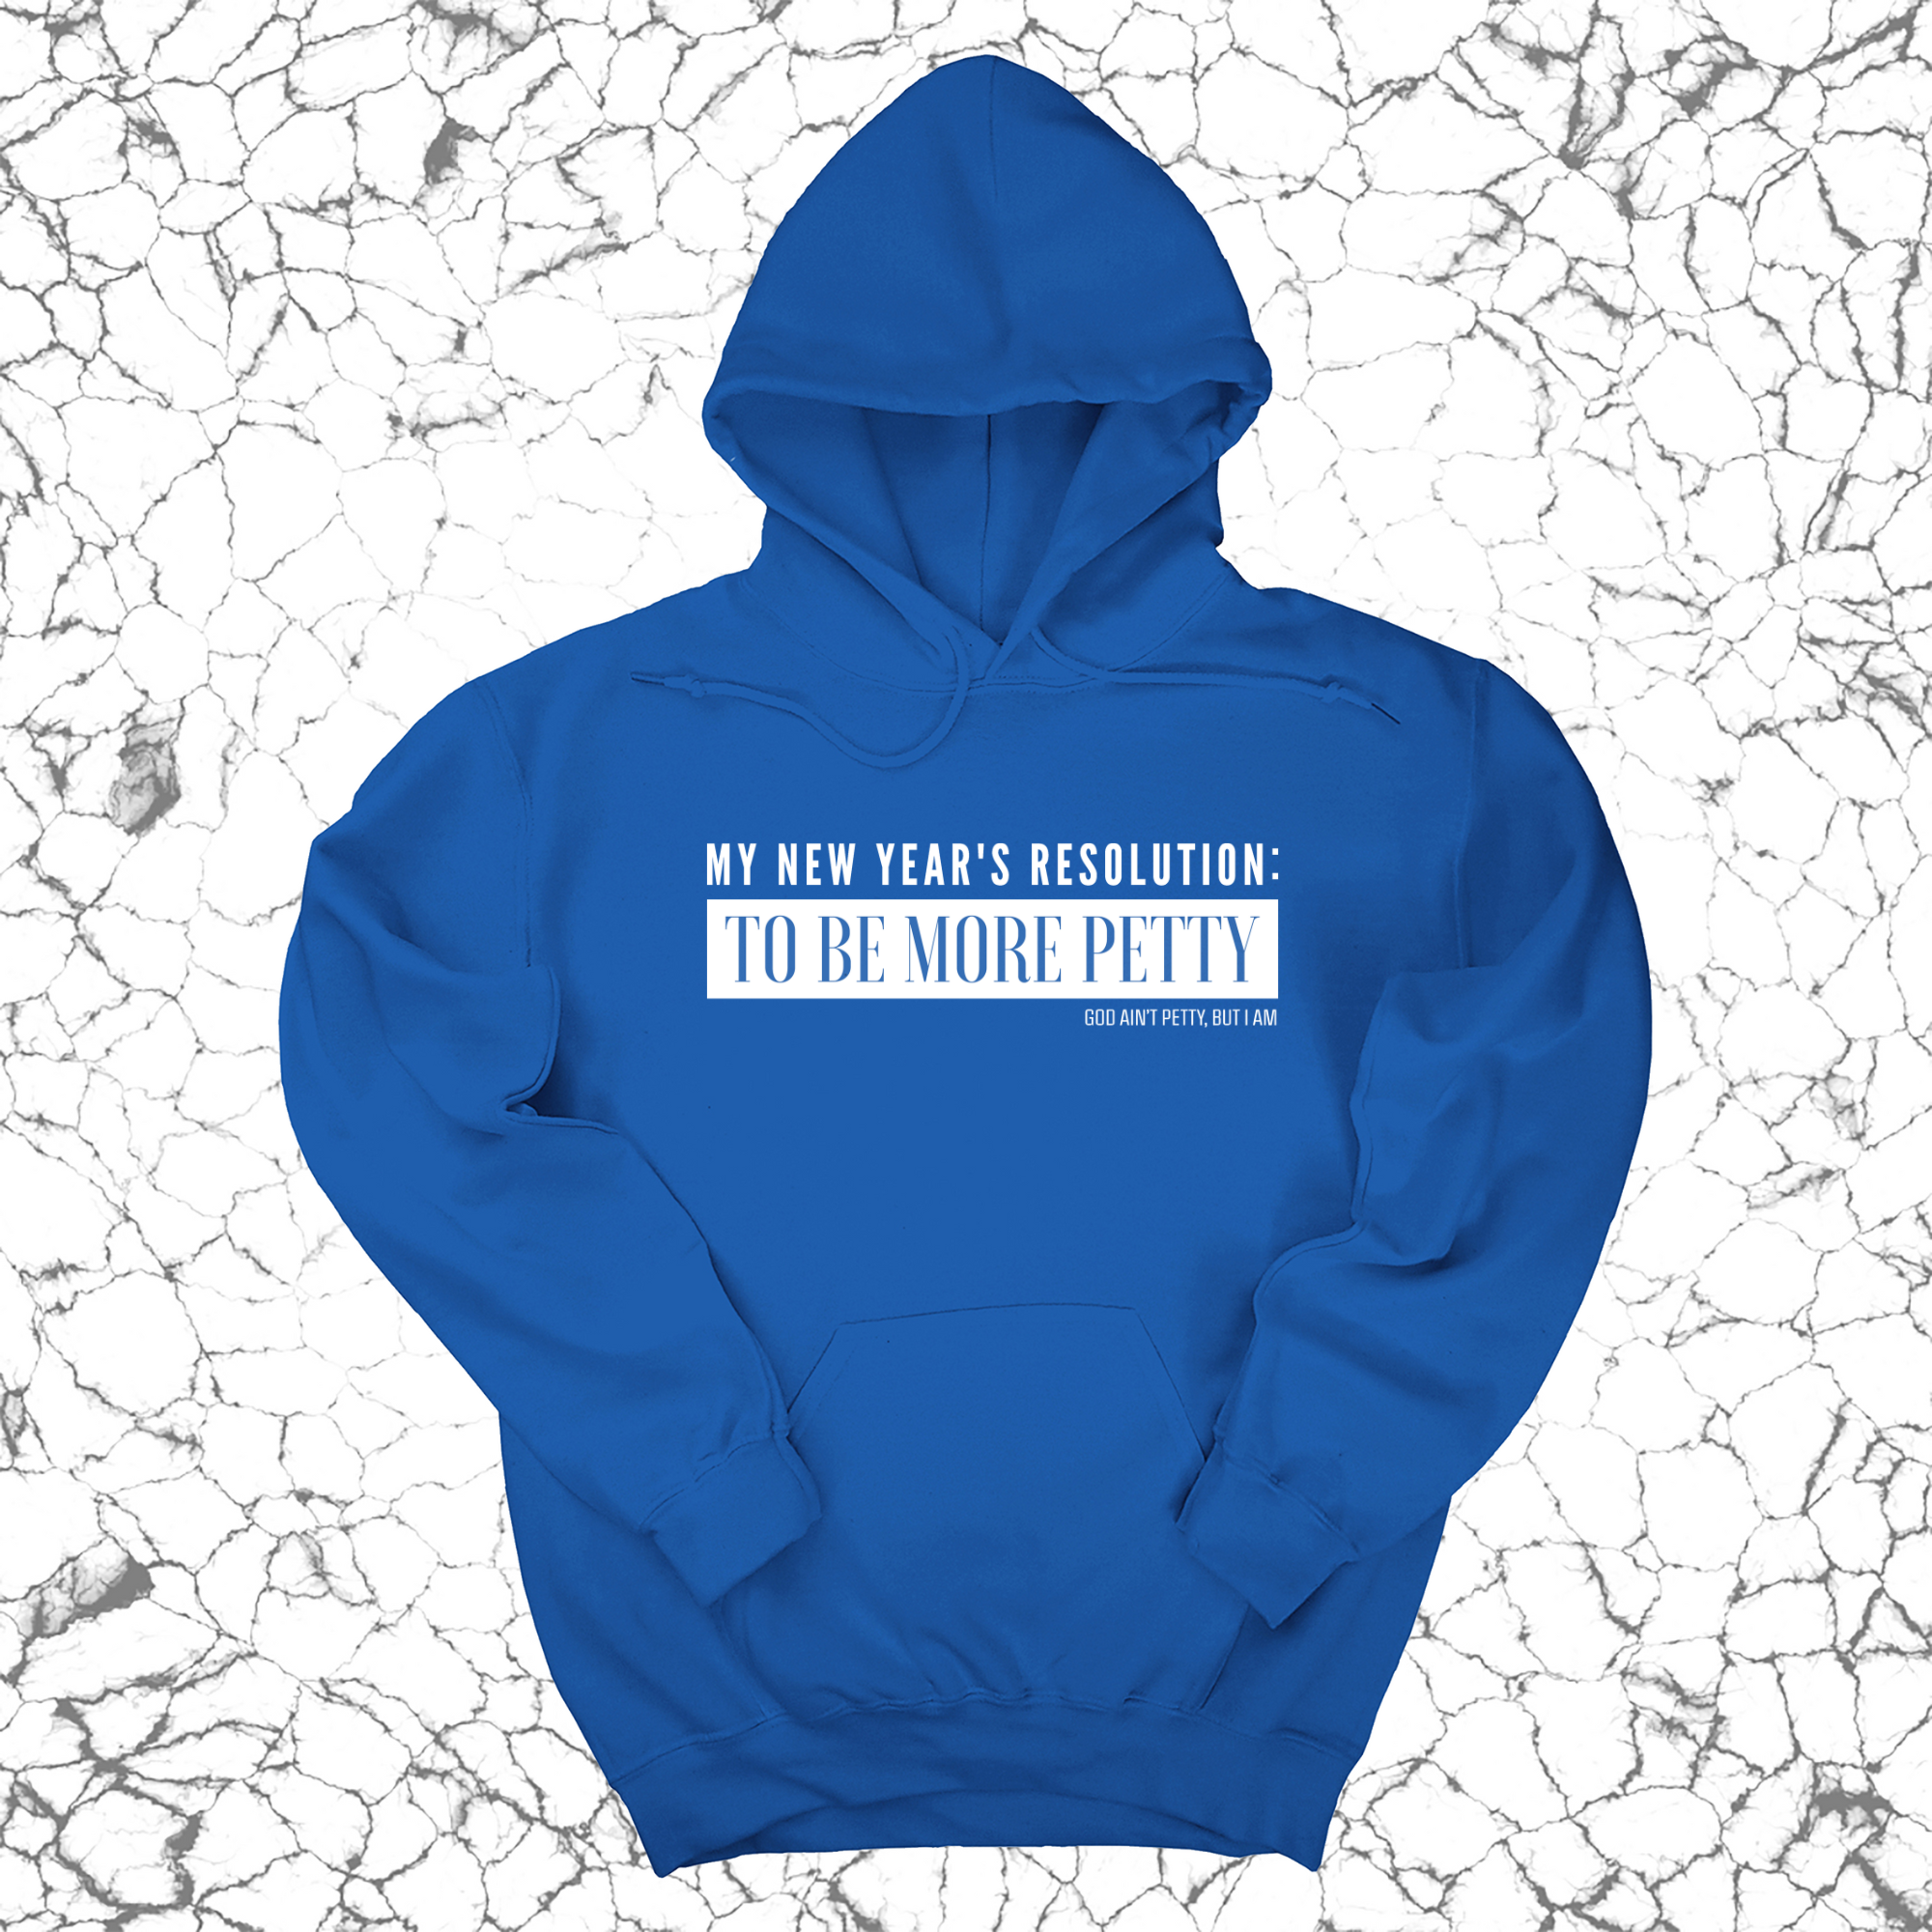 My New Year's Resolution: To Be More Petty Unisex Hoodie-Hoodie-The Original God Ain't Petty But I Am